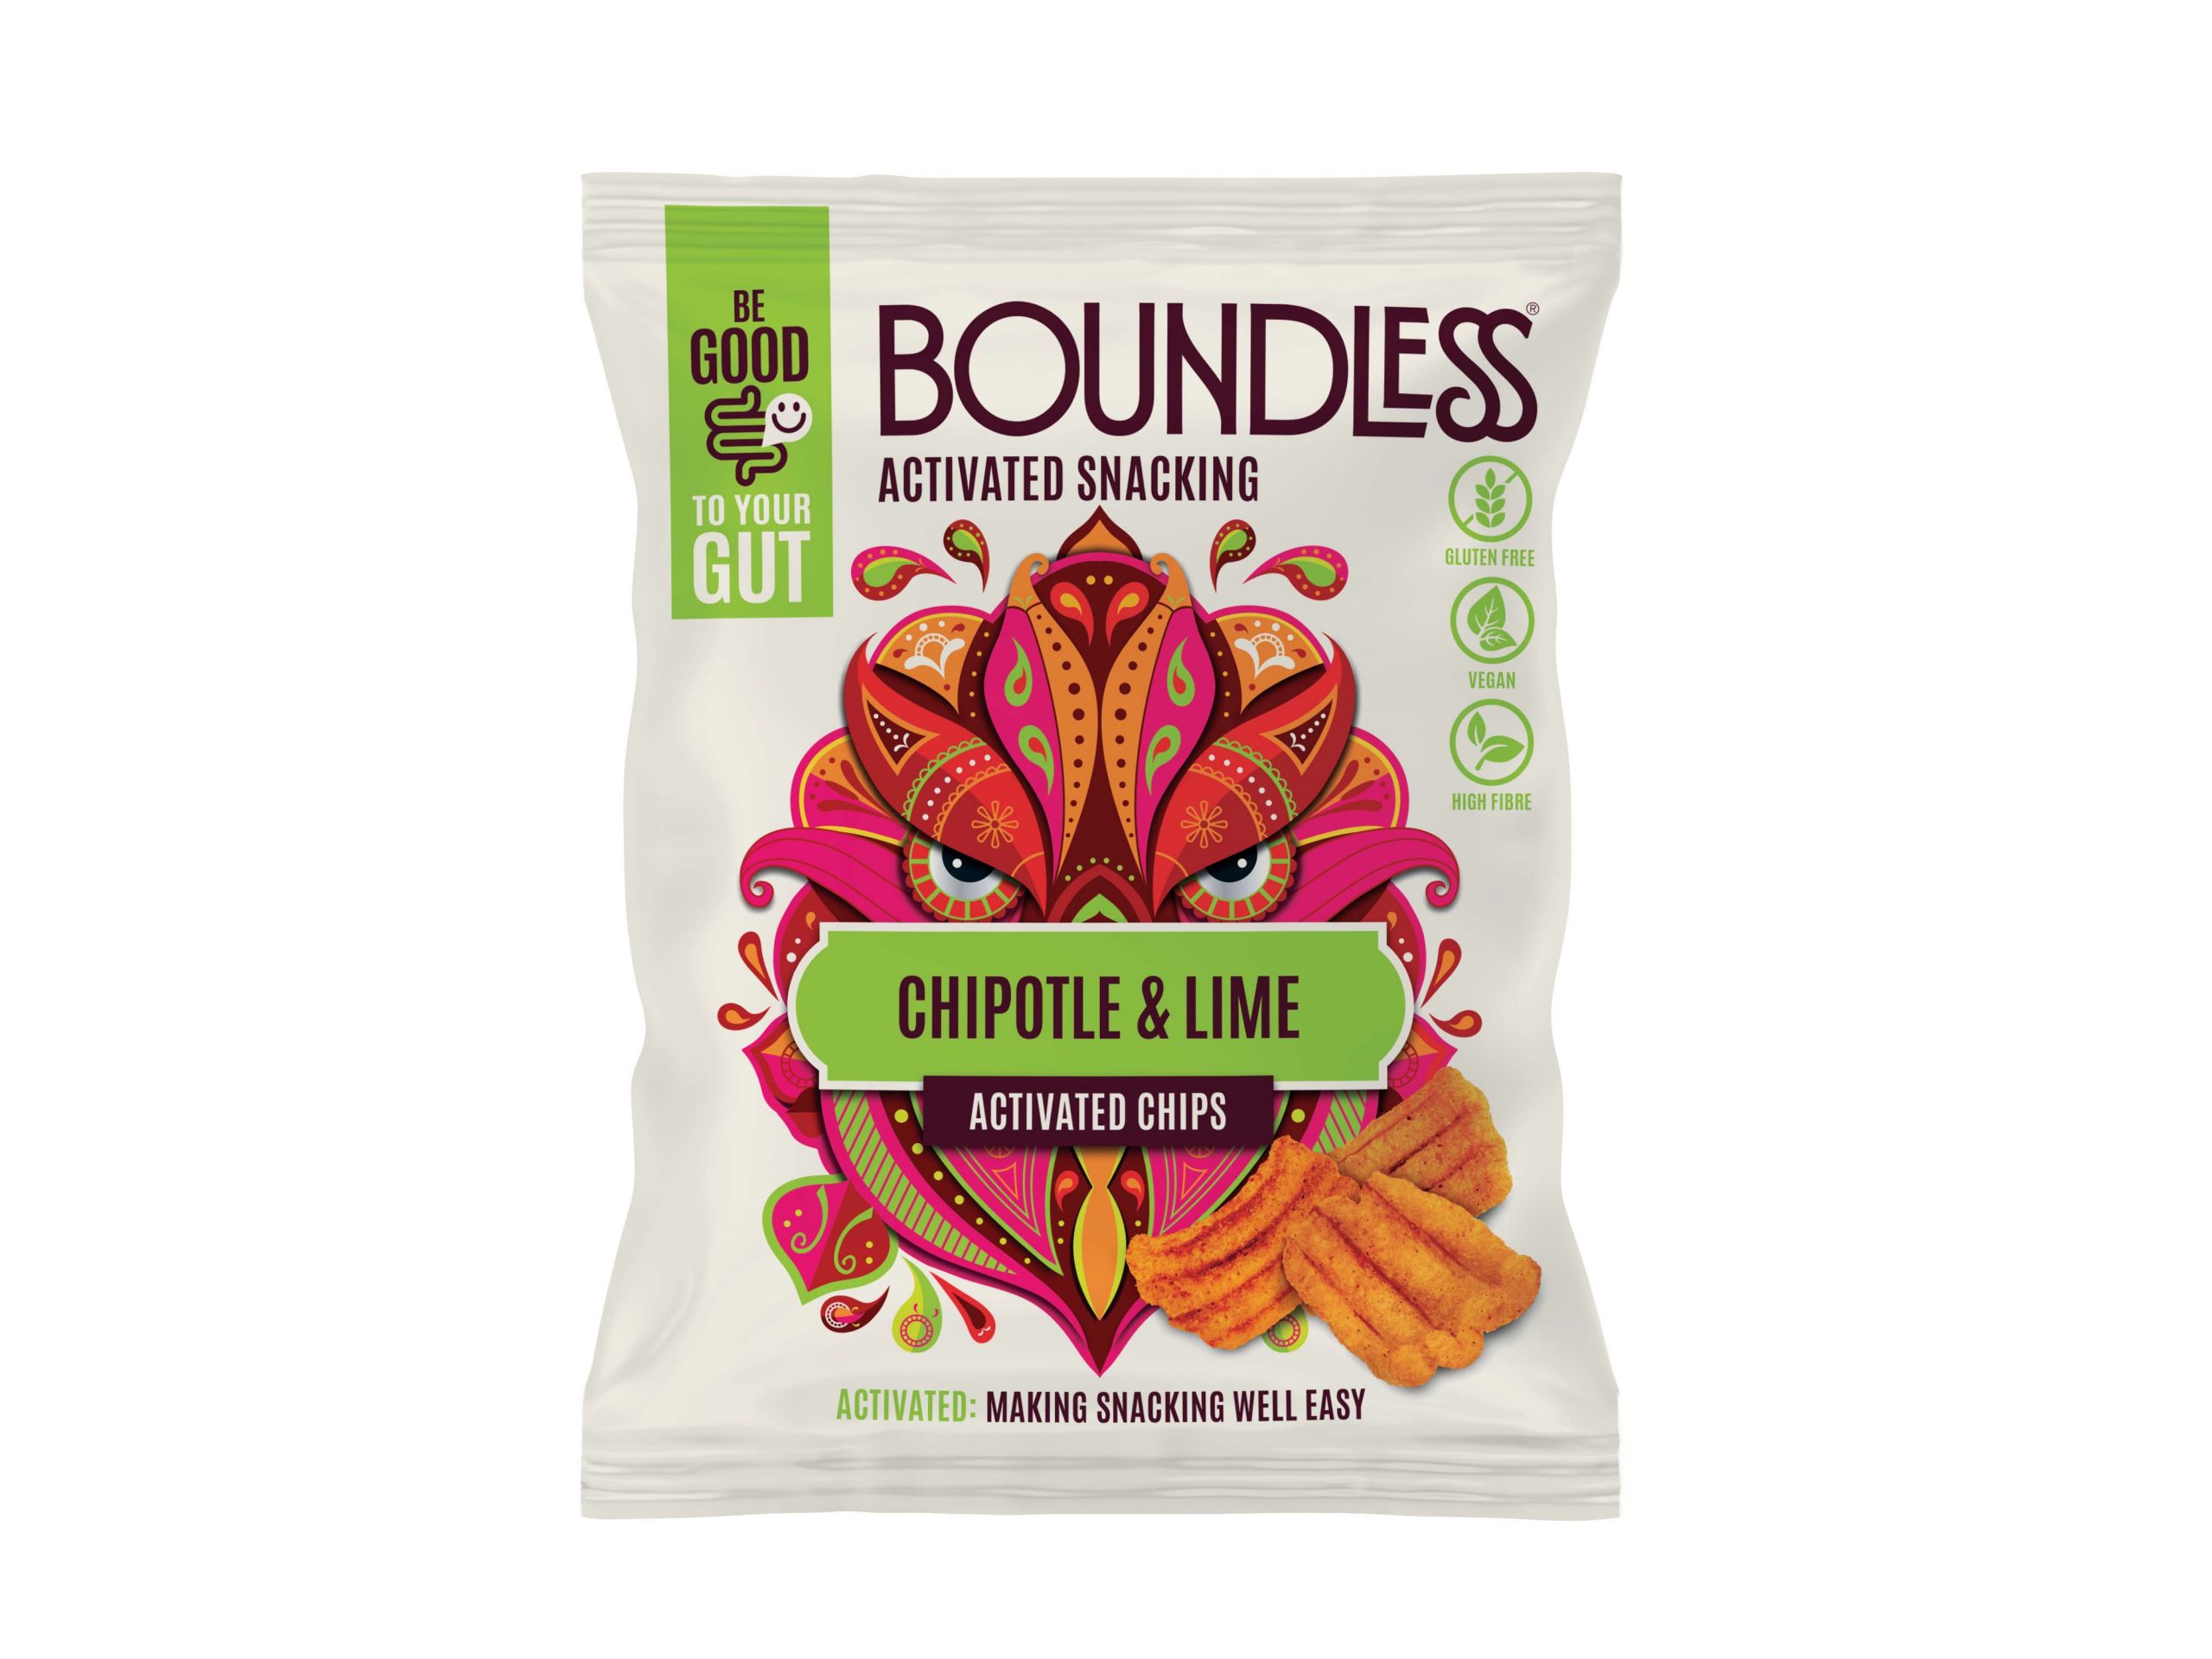 Boundless Activated Snacking targets meal-deal market with Grab & Go bag